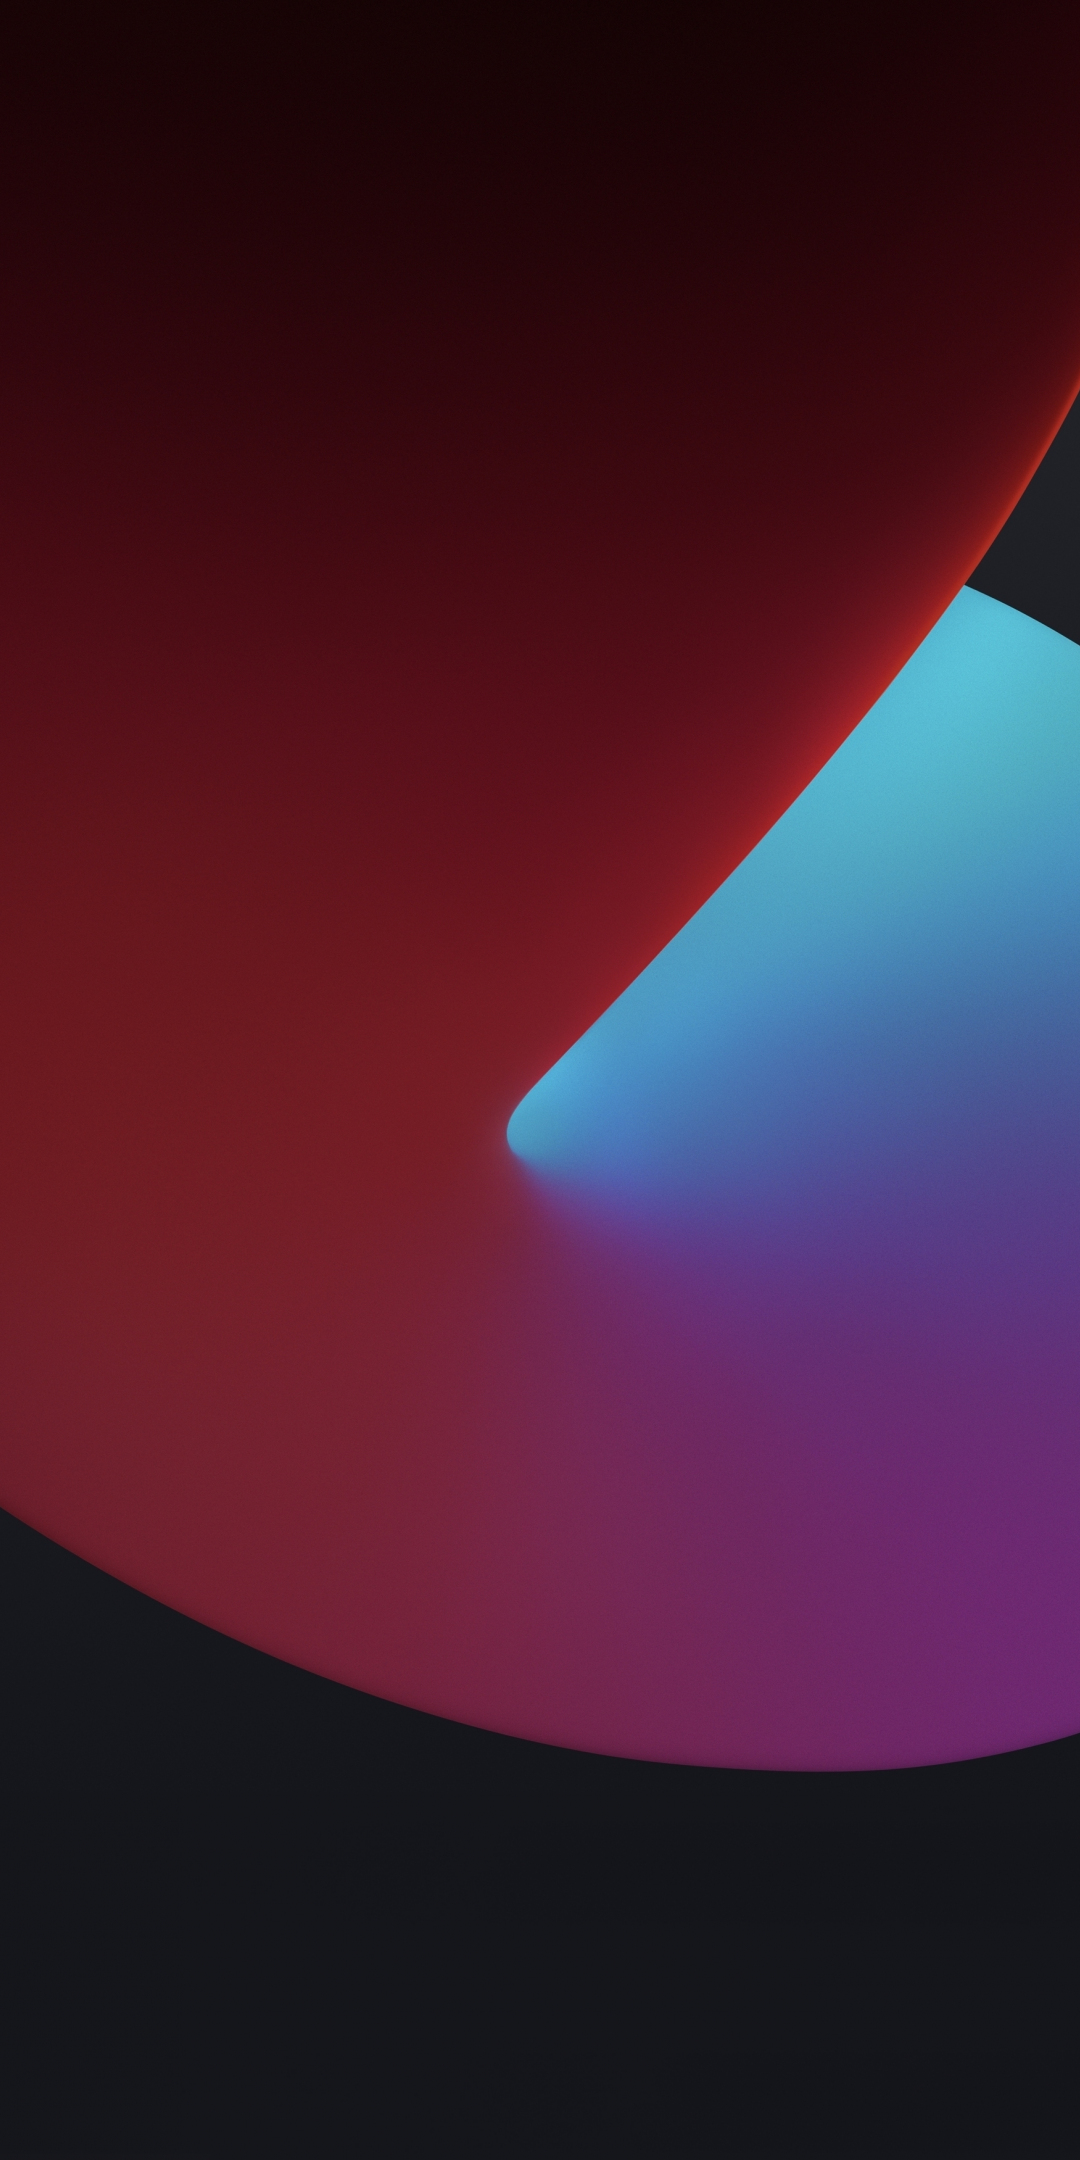 Red-blue, abstract iPad OS 14, 1080x2160 wallpaper